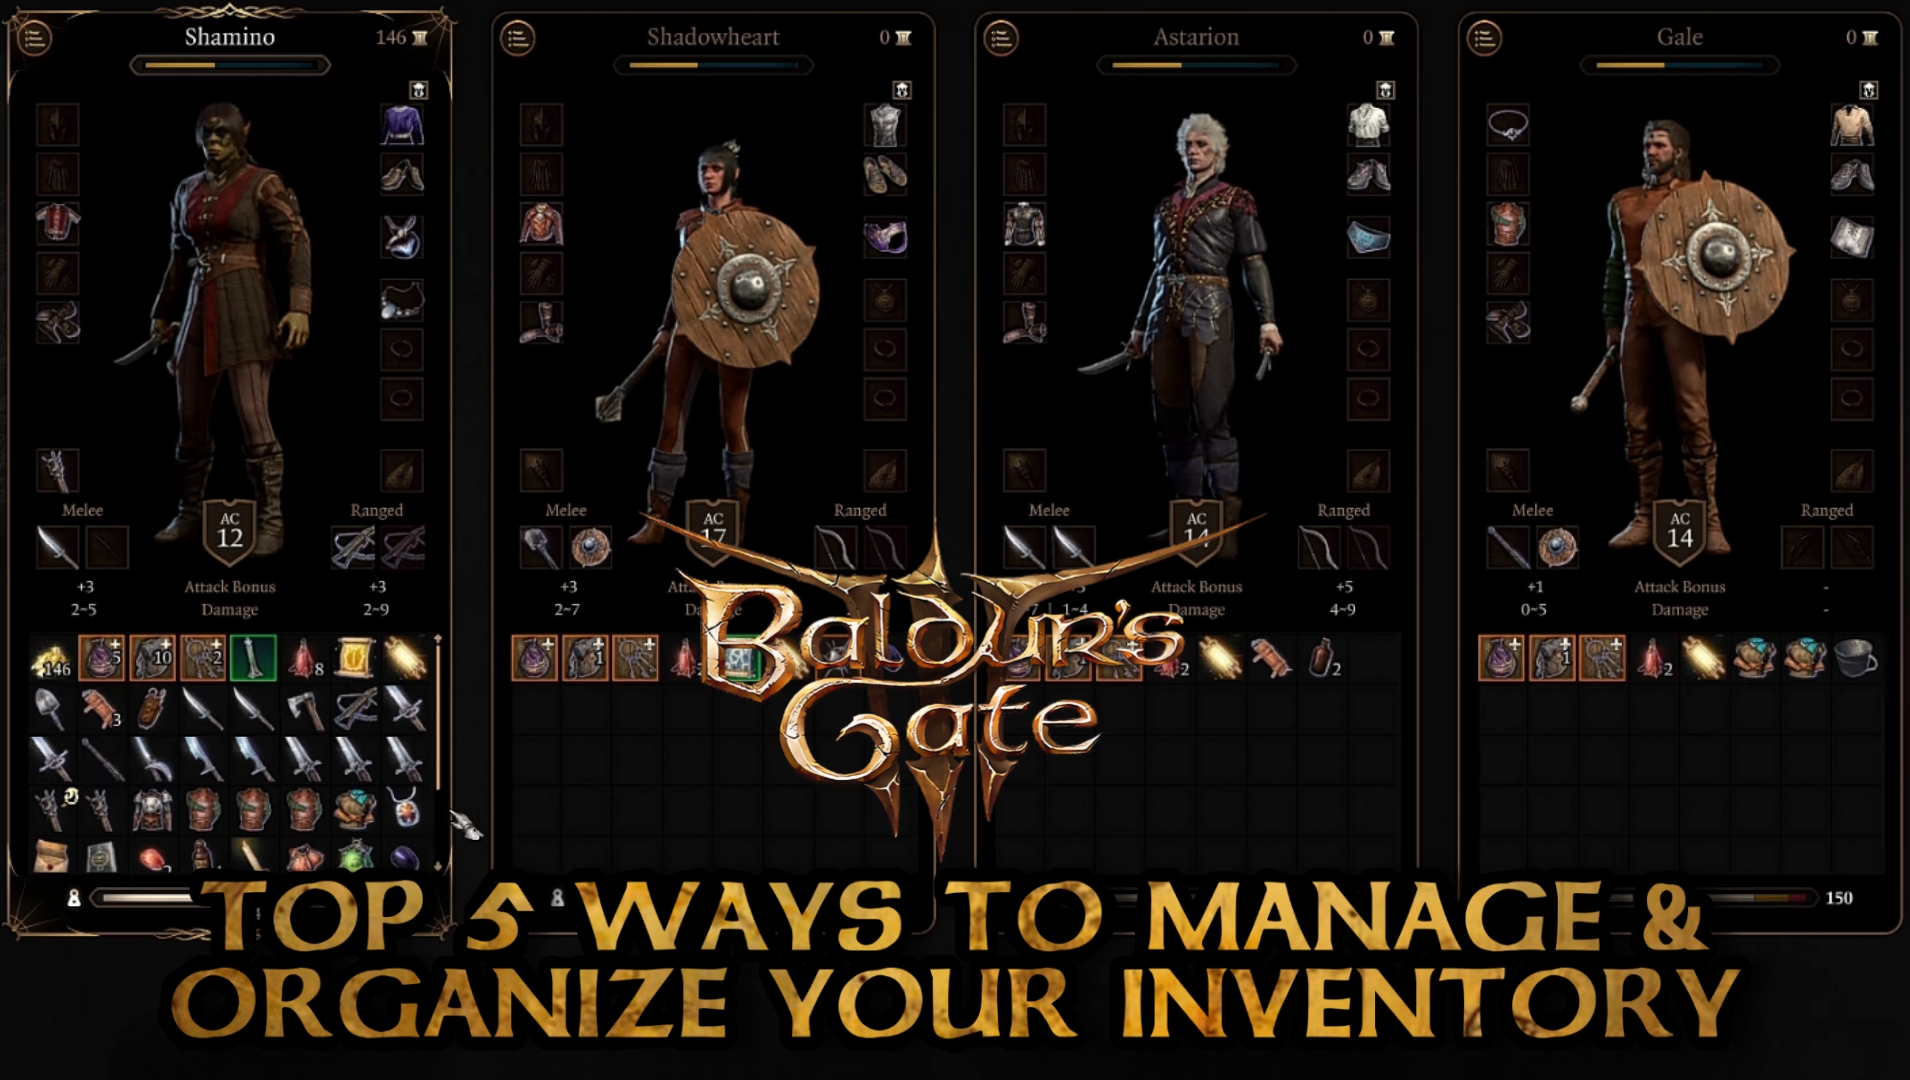 Top 5 Ways to Manage and Organize Your Inventory – Baldur’s Gate 3 cover